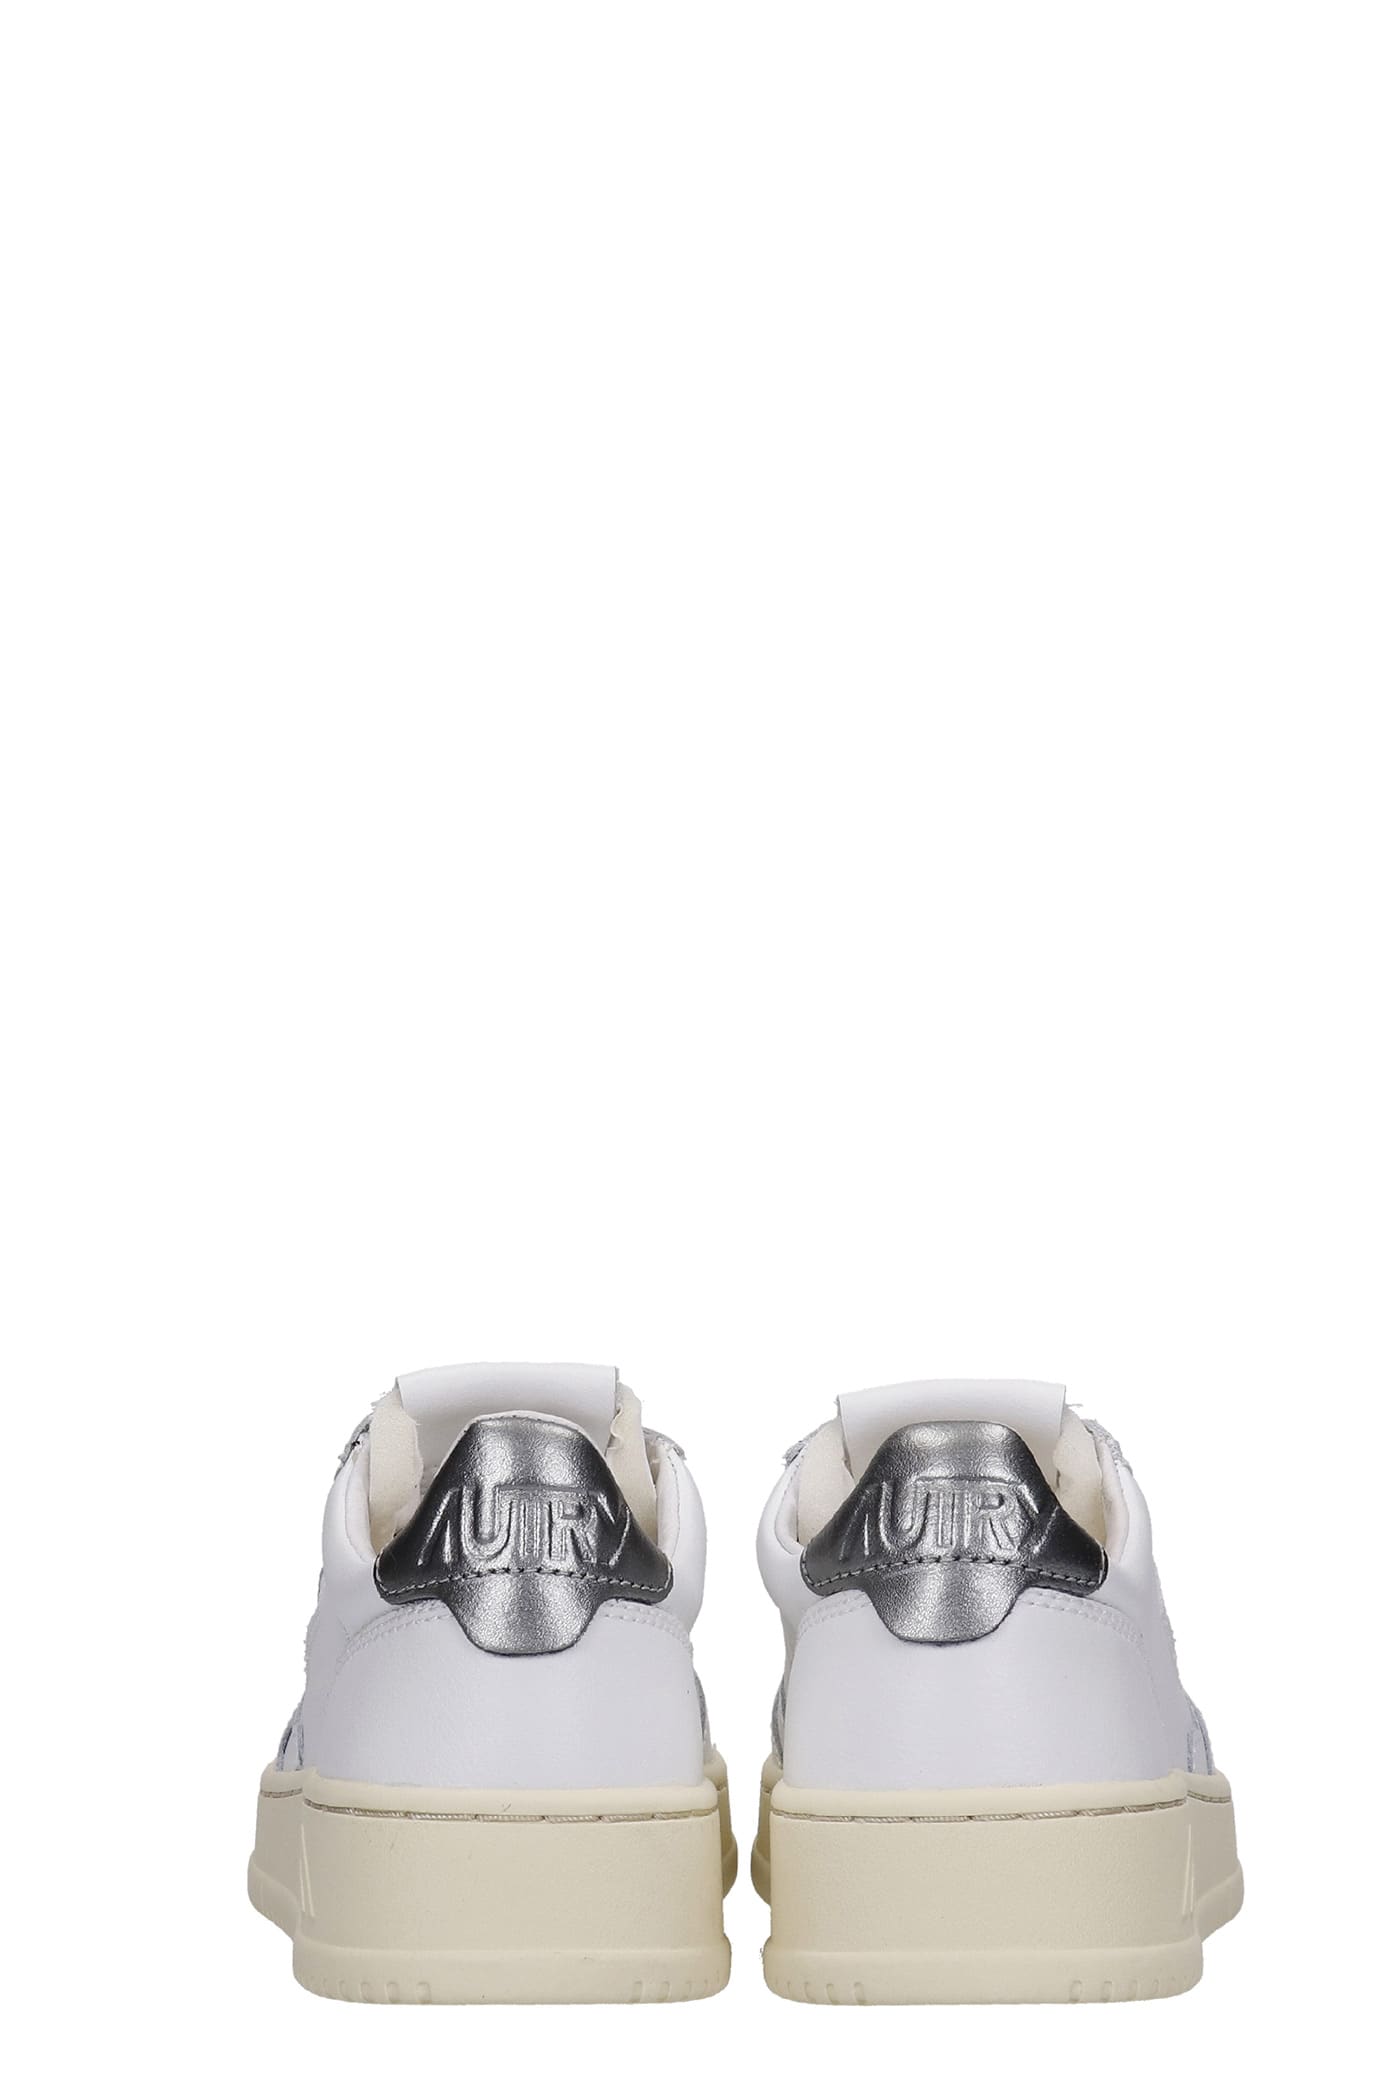 Shop Autry 01 Sneakers In White Leather